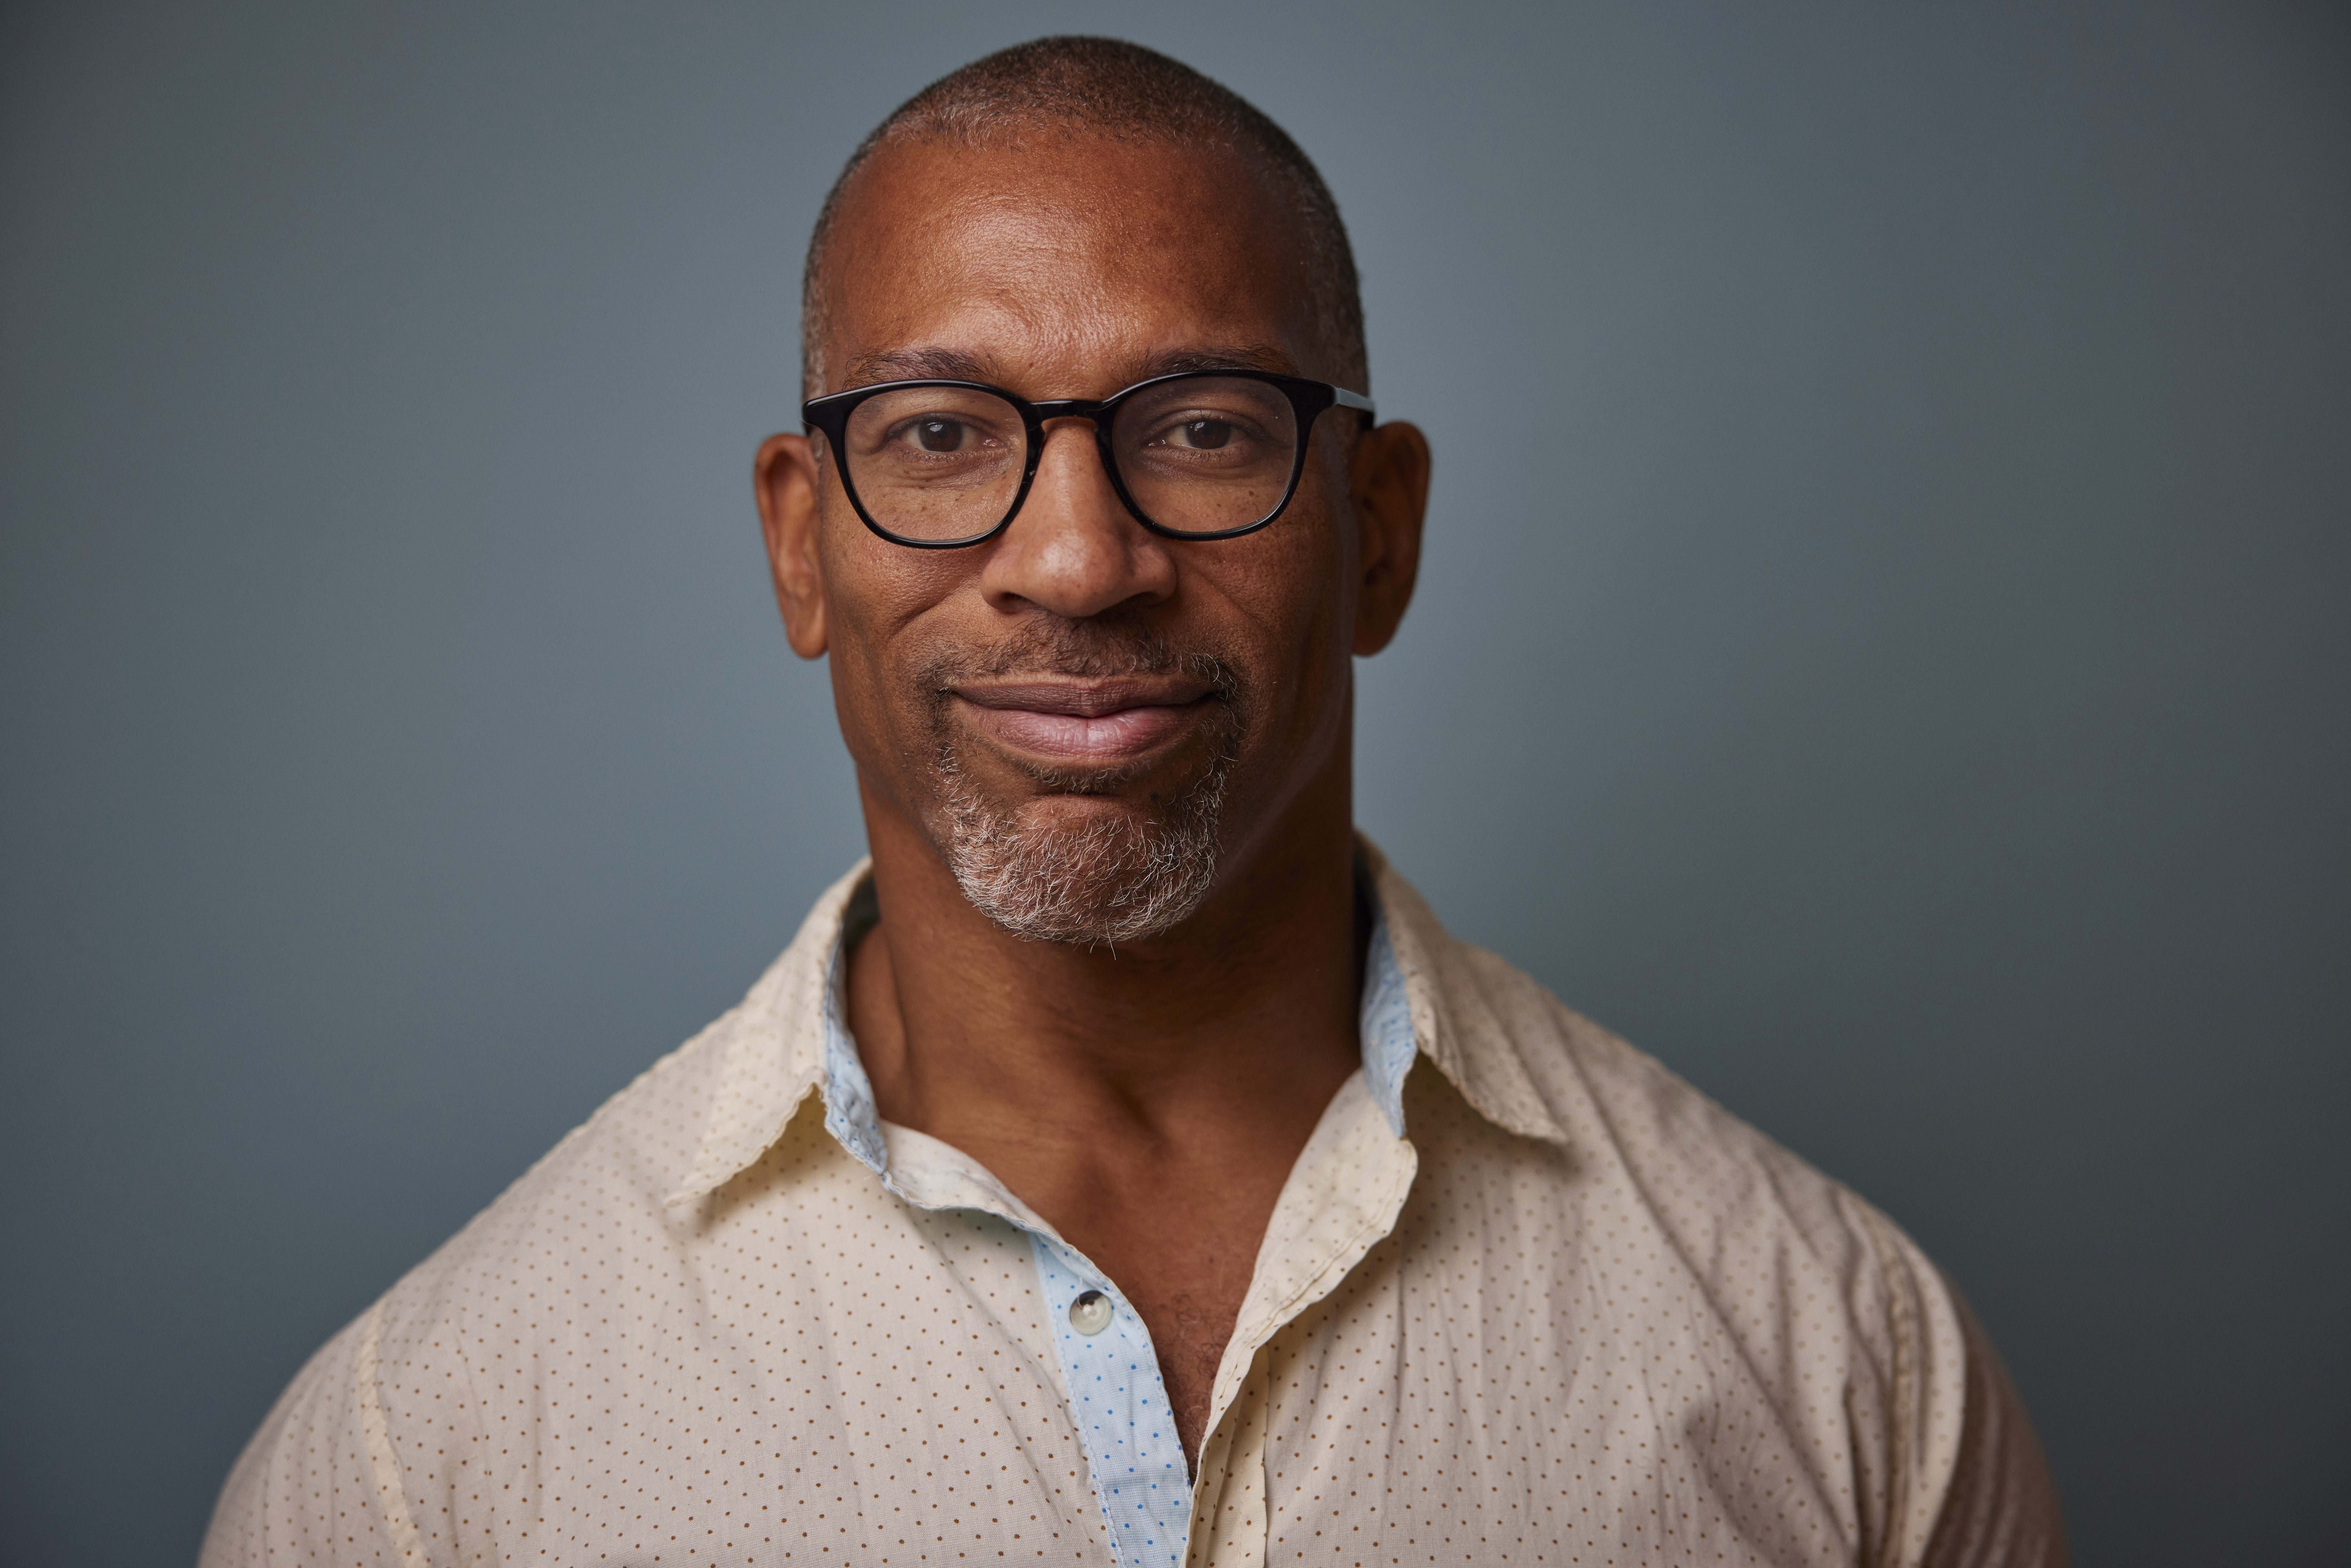 Christian Cooper poses for a portrait to promote the book "Better Living Through Birding: Notes from a Black Man in the Natural World" on Wednesday, June 14, 2023, in New York. (Photo credit: Matt Licari, Invision/The Associated Press